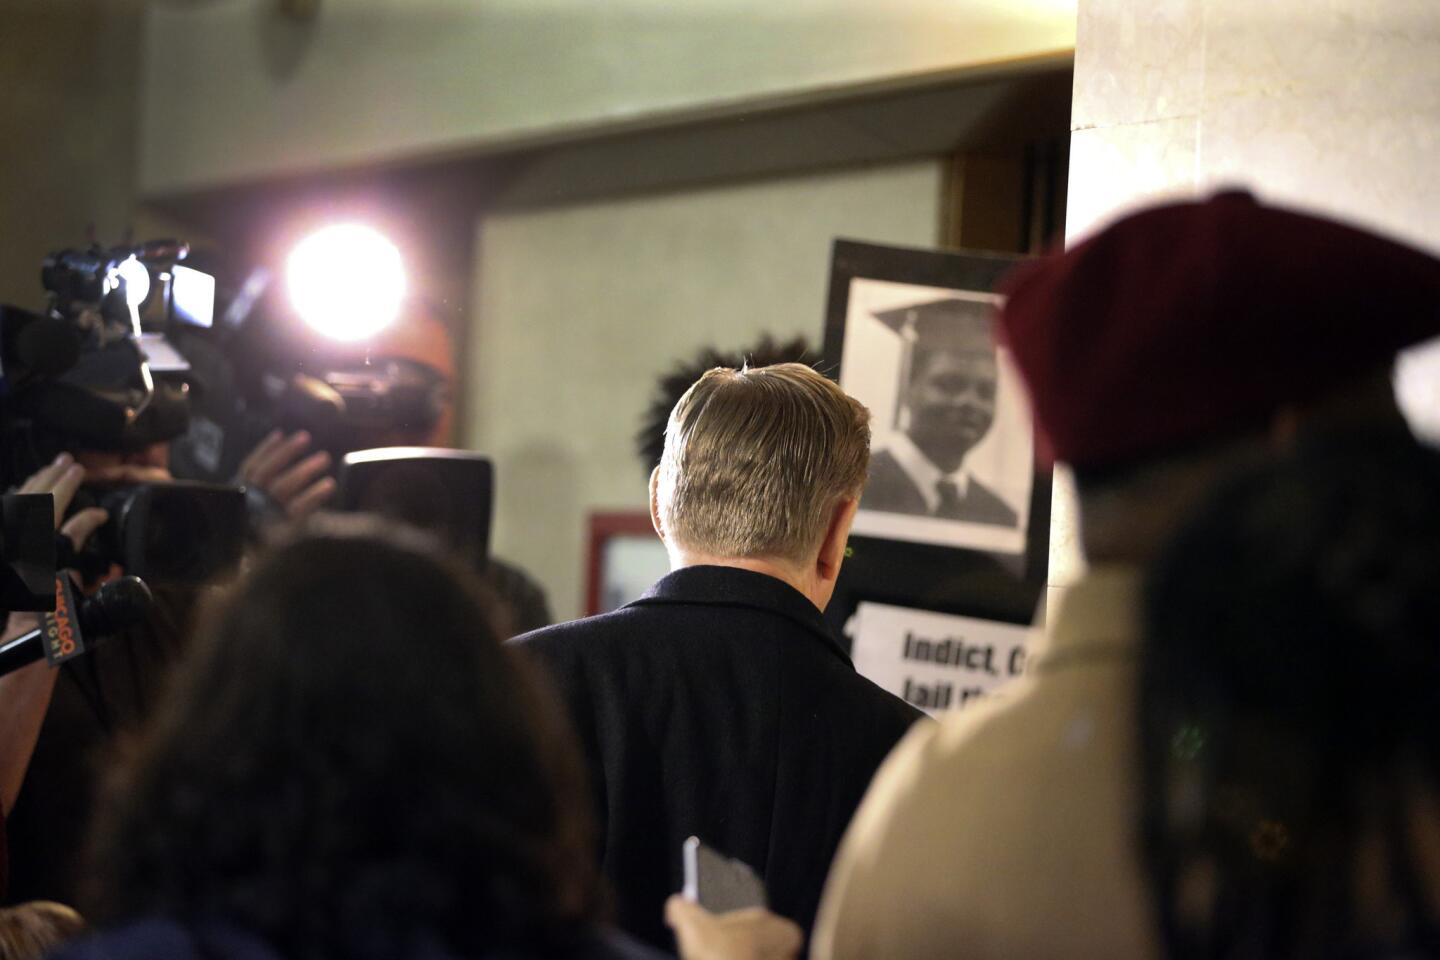 The Rev. Michael Pfleger, center, pastor at St. Sabina Church, heads to the elevators after refusing to take questions from reporters following a meeting with Mayor Rahm Emanuel at City Hall in Chicago on Nov. 23, 2015. The mayor discussed the impending release of a video showing Laquan McDonald being shot and killed by a Chicago police officer.